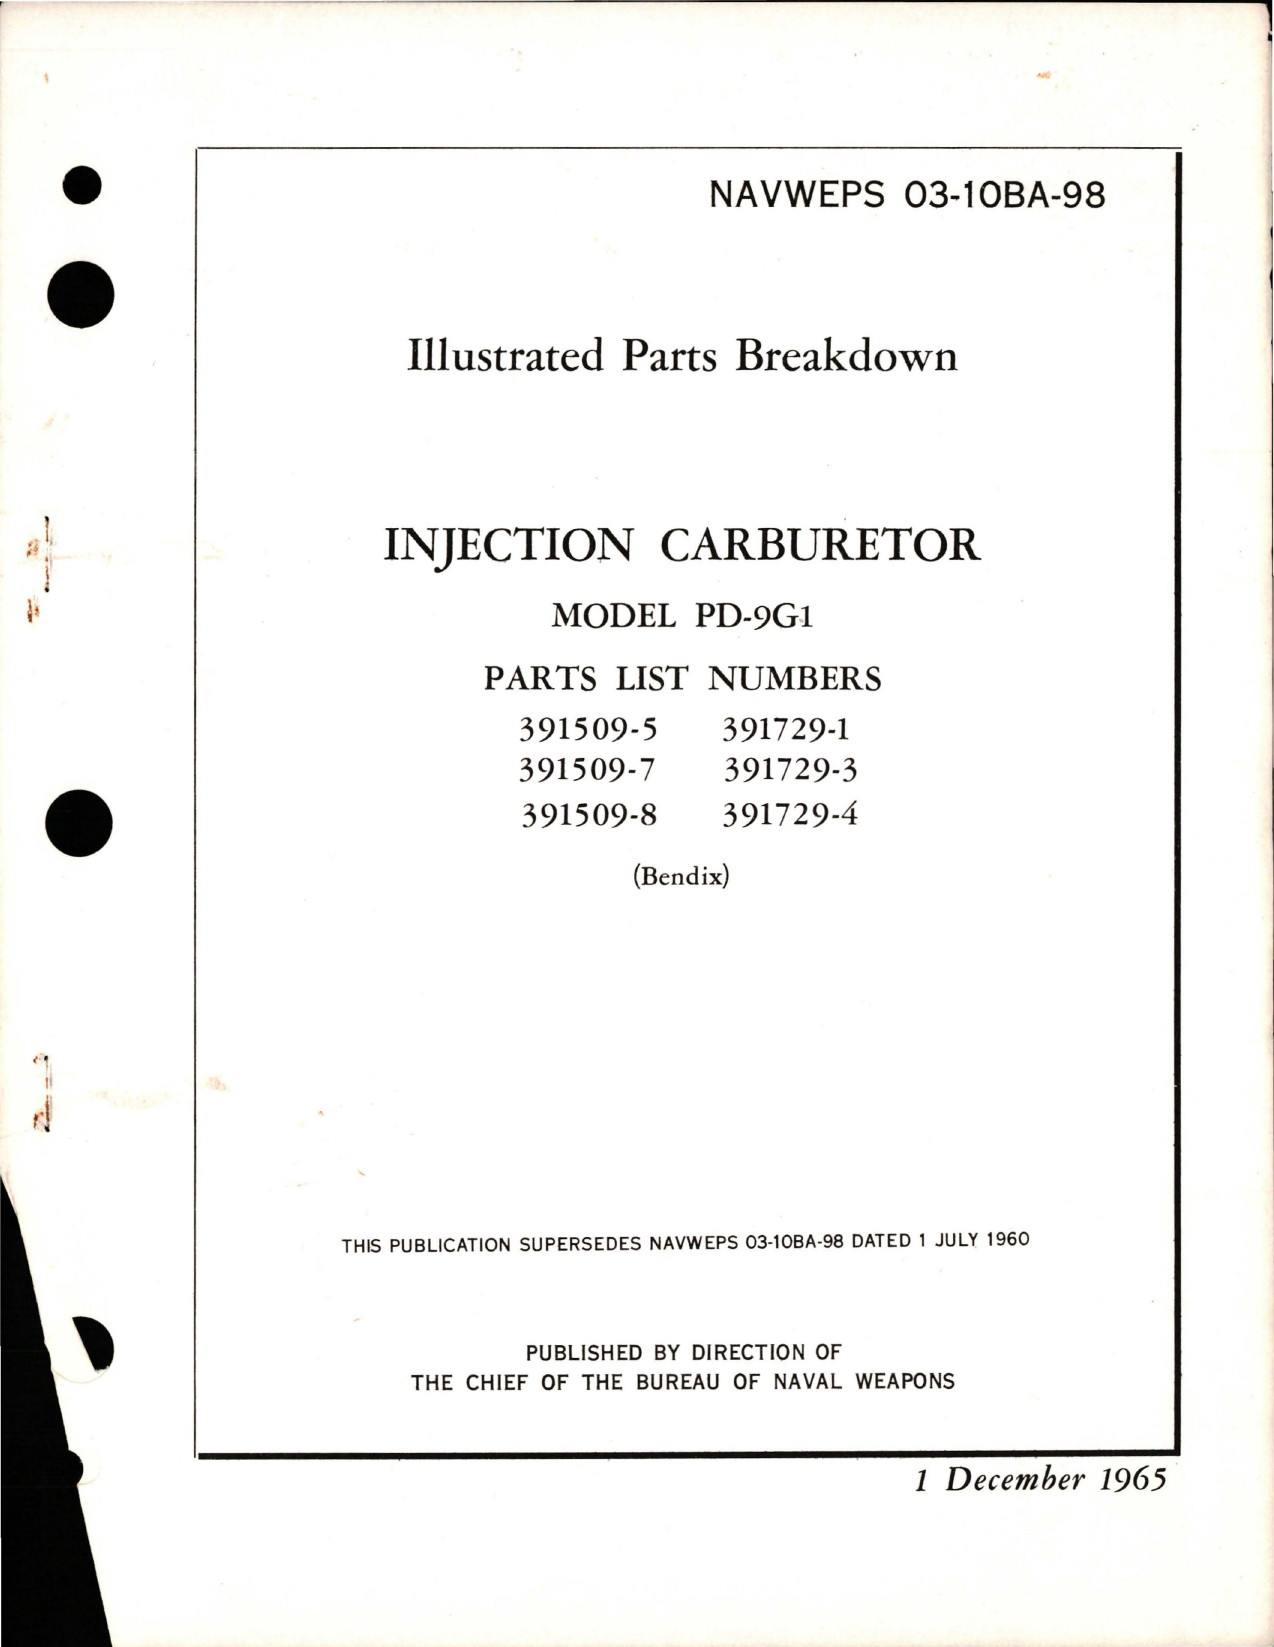 Sample page 1 from AirCorps Library document: Illustrated Parts Breakdown for Injection Carburetor - Model PD-9G1 